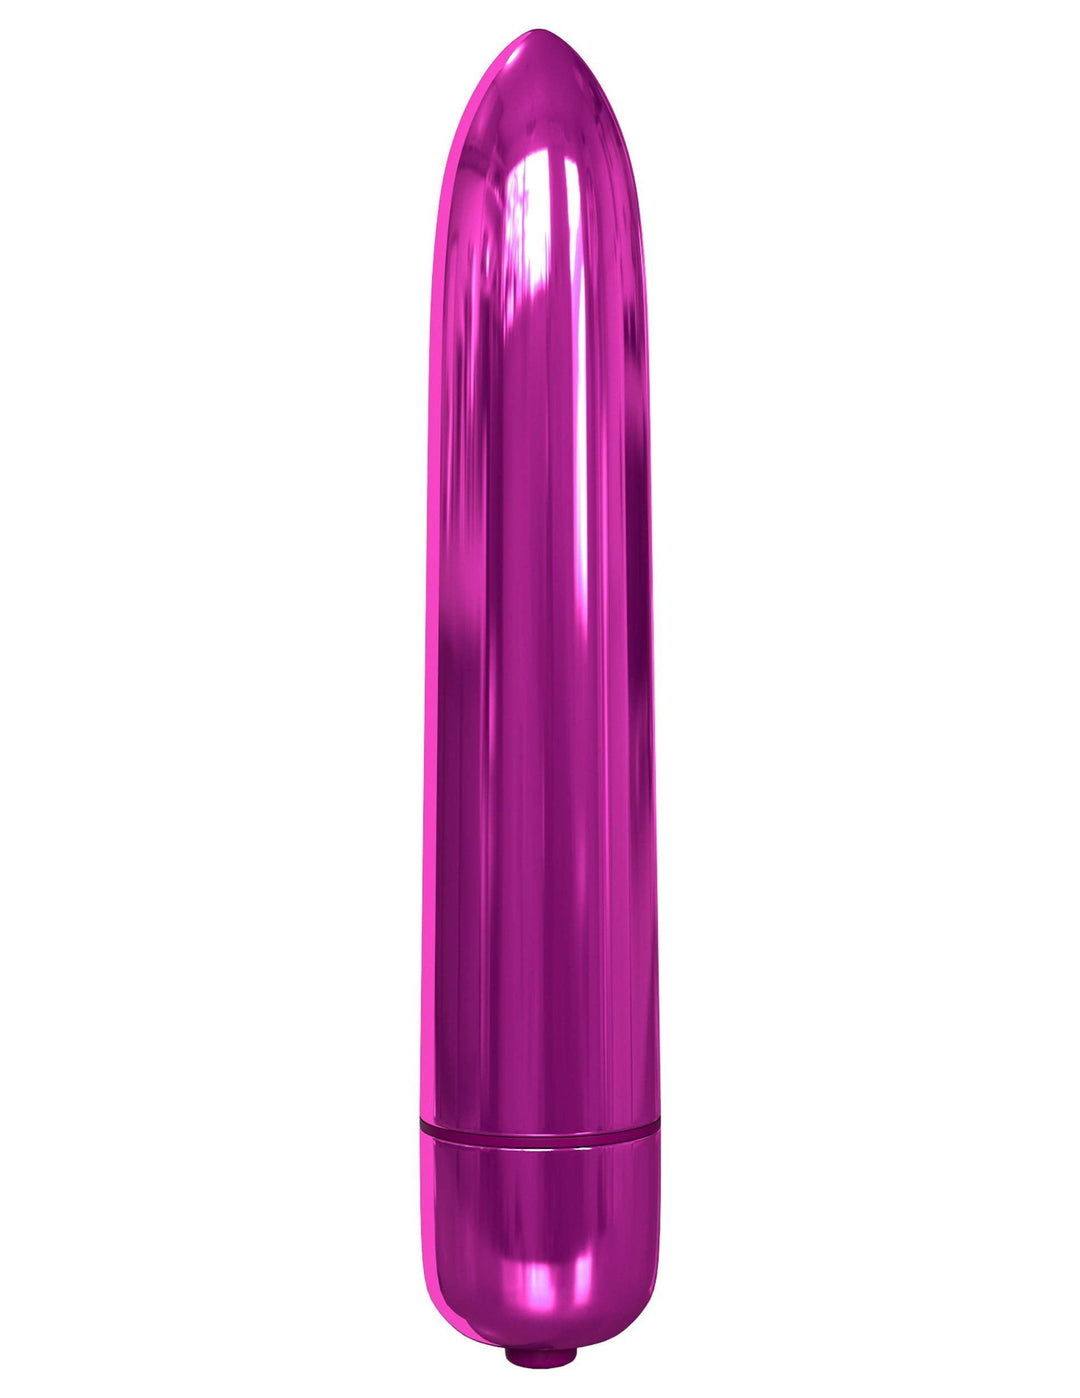 Naked Curve Classix Rocket Bullet - Pipedream Metallic Pink